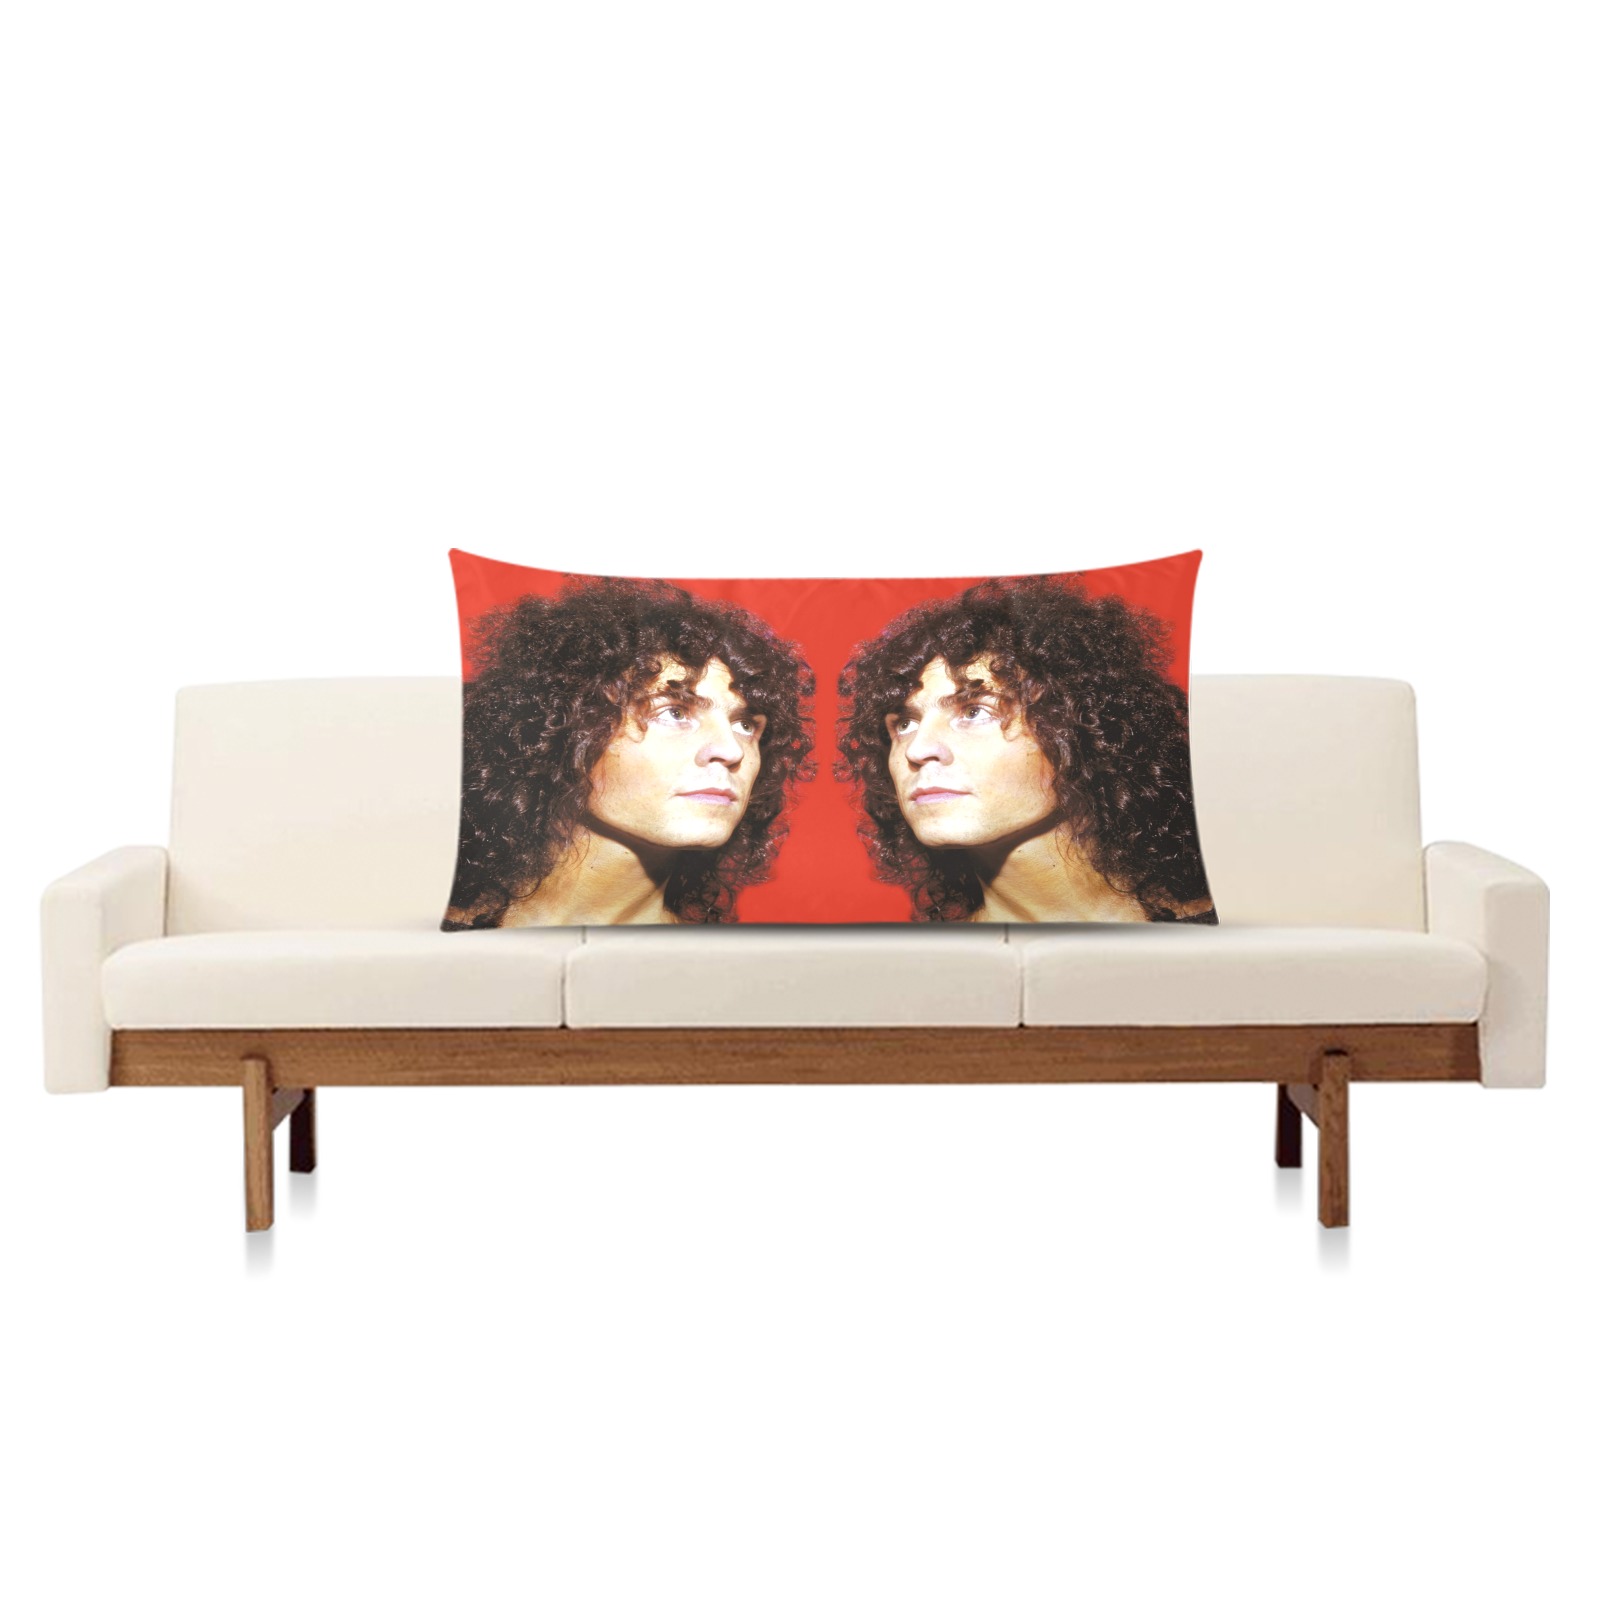 RED MARC BOLAN AND T.REX Rectangle Pillow Case 20"x36"(Twin Sides)